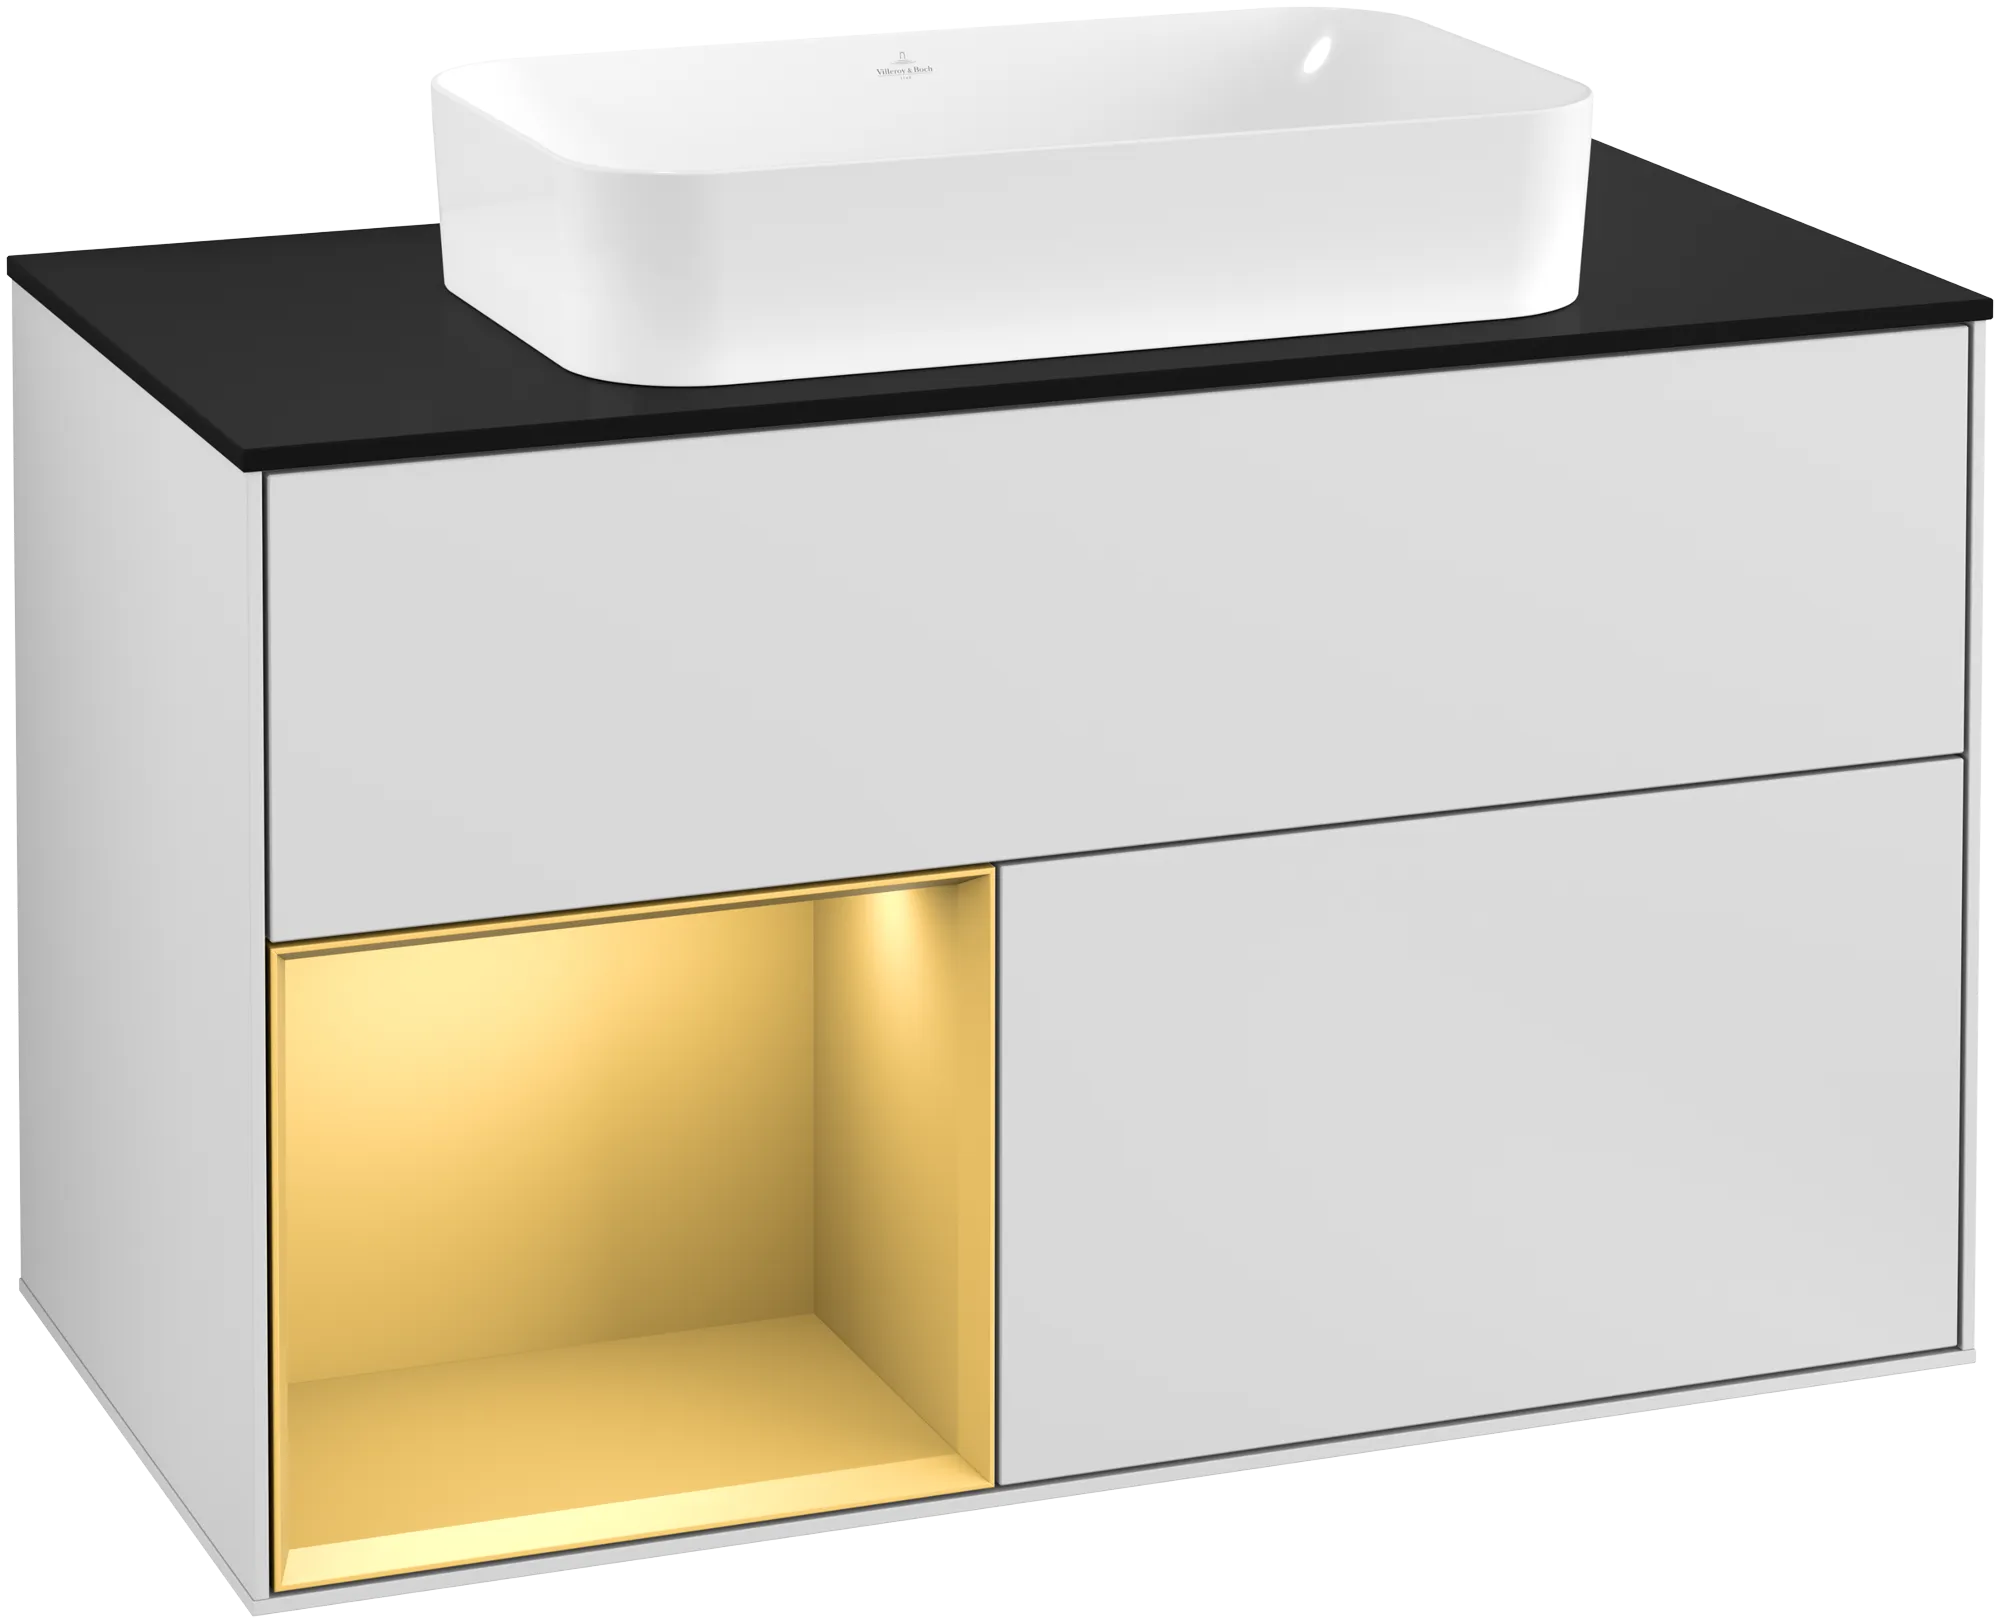 Picture of VILLEROY BOCH Finion Vanity unit, with lighting, 2 pull-out compartments, 1000 x 603 x 501 mm, White Matt Lacquer / Gold Matt Lacquer / Glass Black Matt #G242HFMT